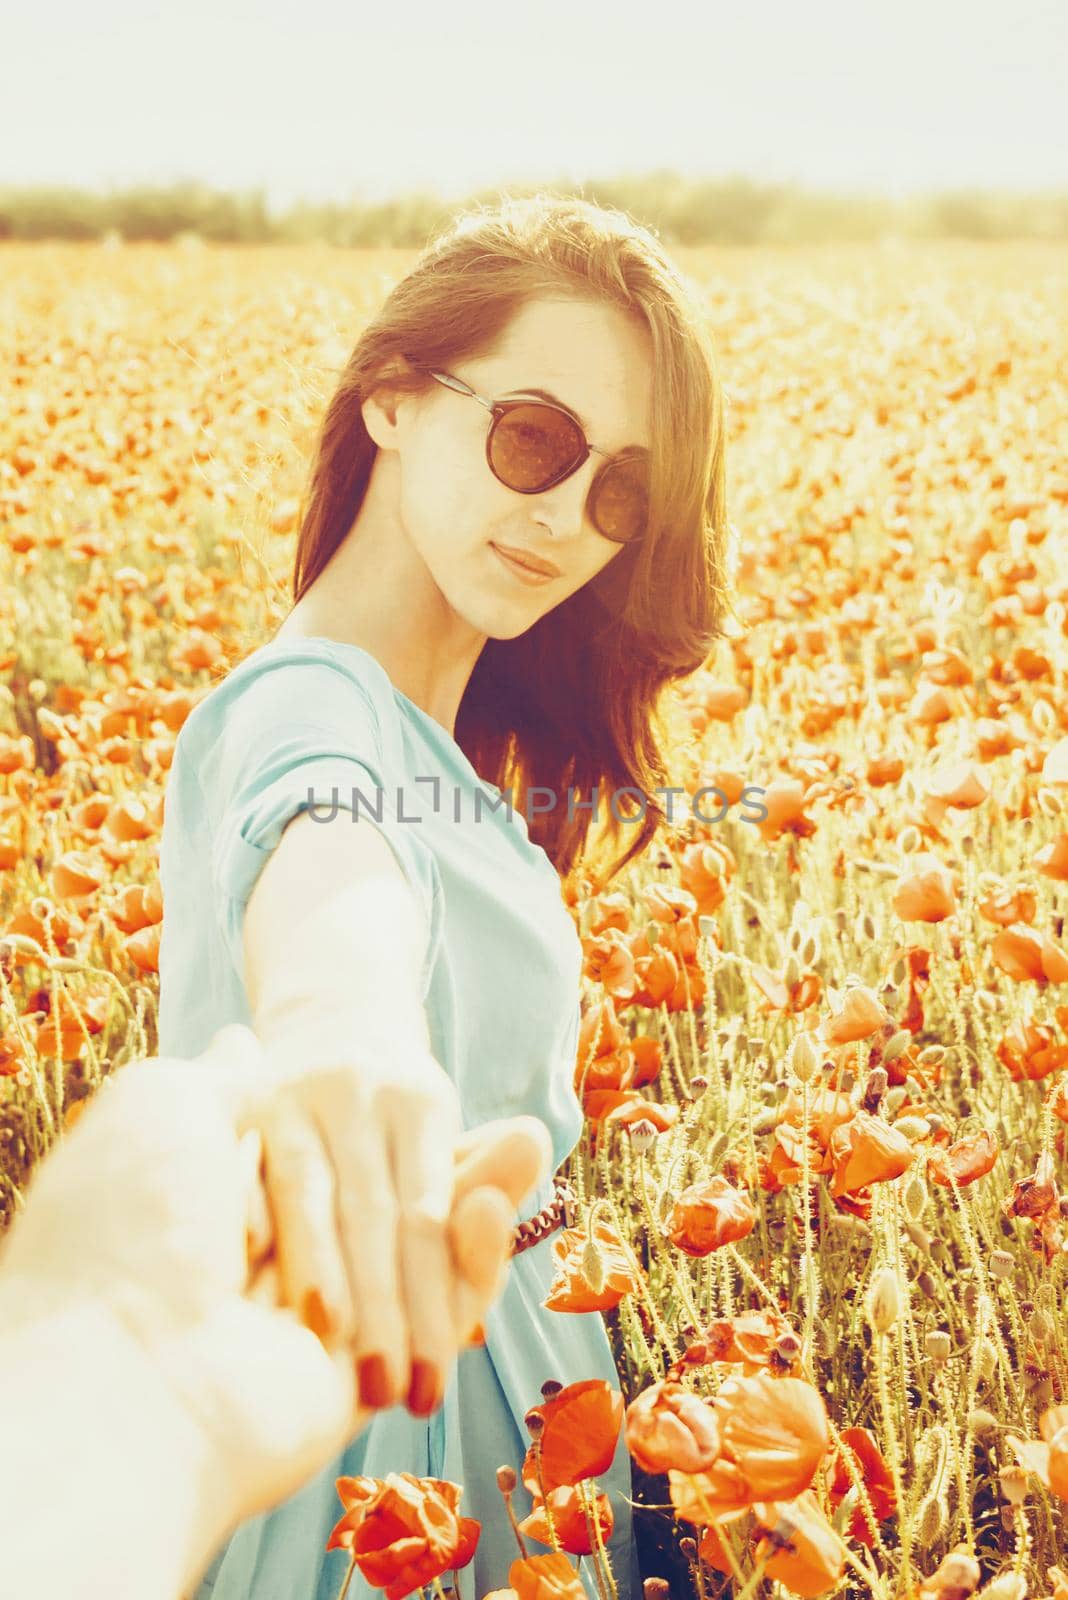 Attractive young woman holding male hand and leading him in poppies flowers meadow outdoor in spring, point of view.